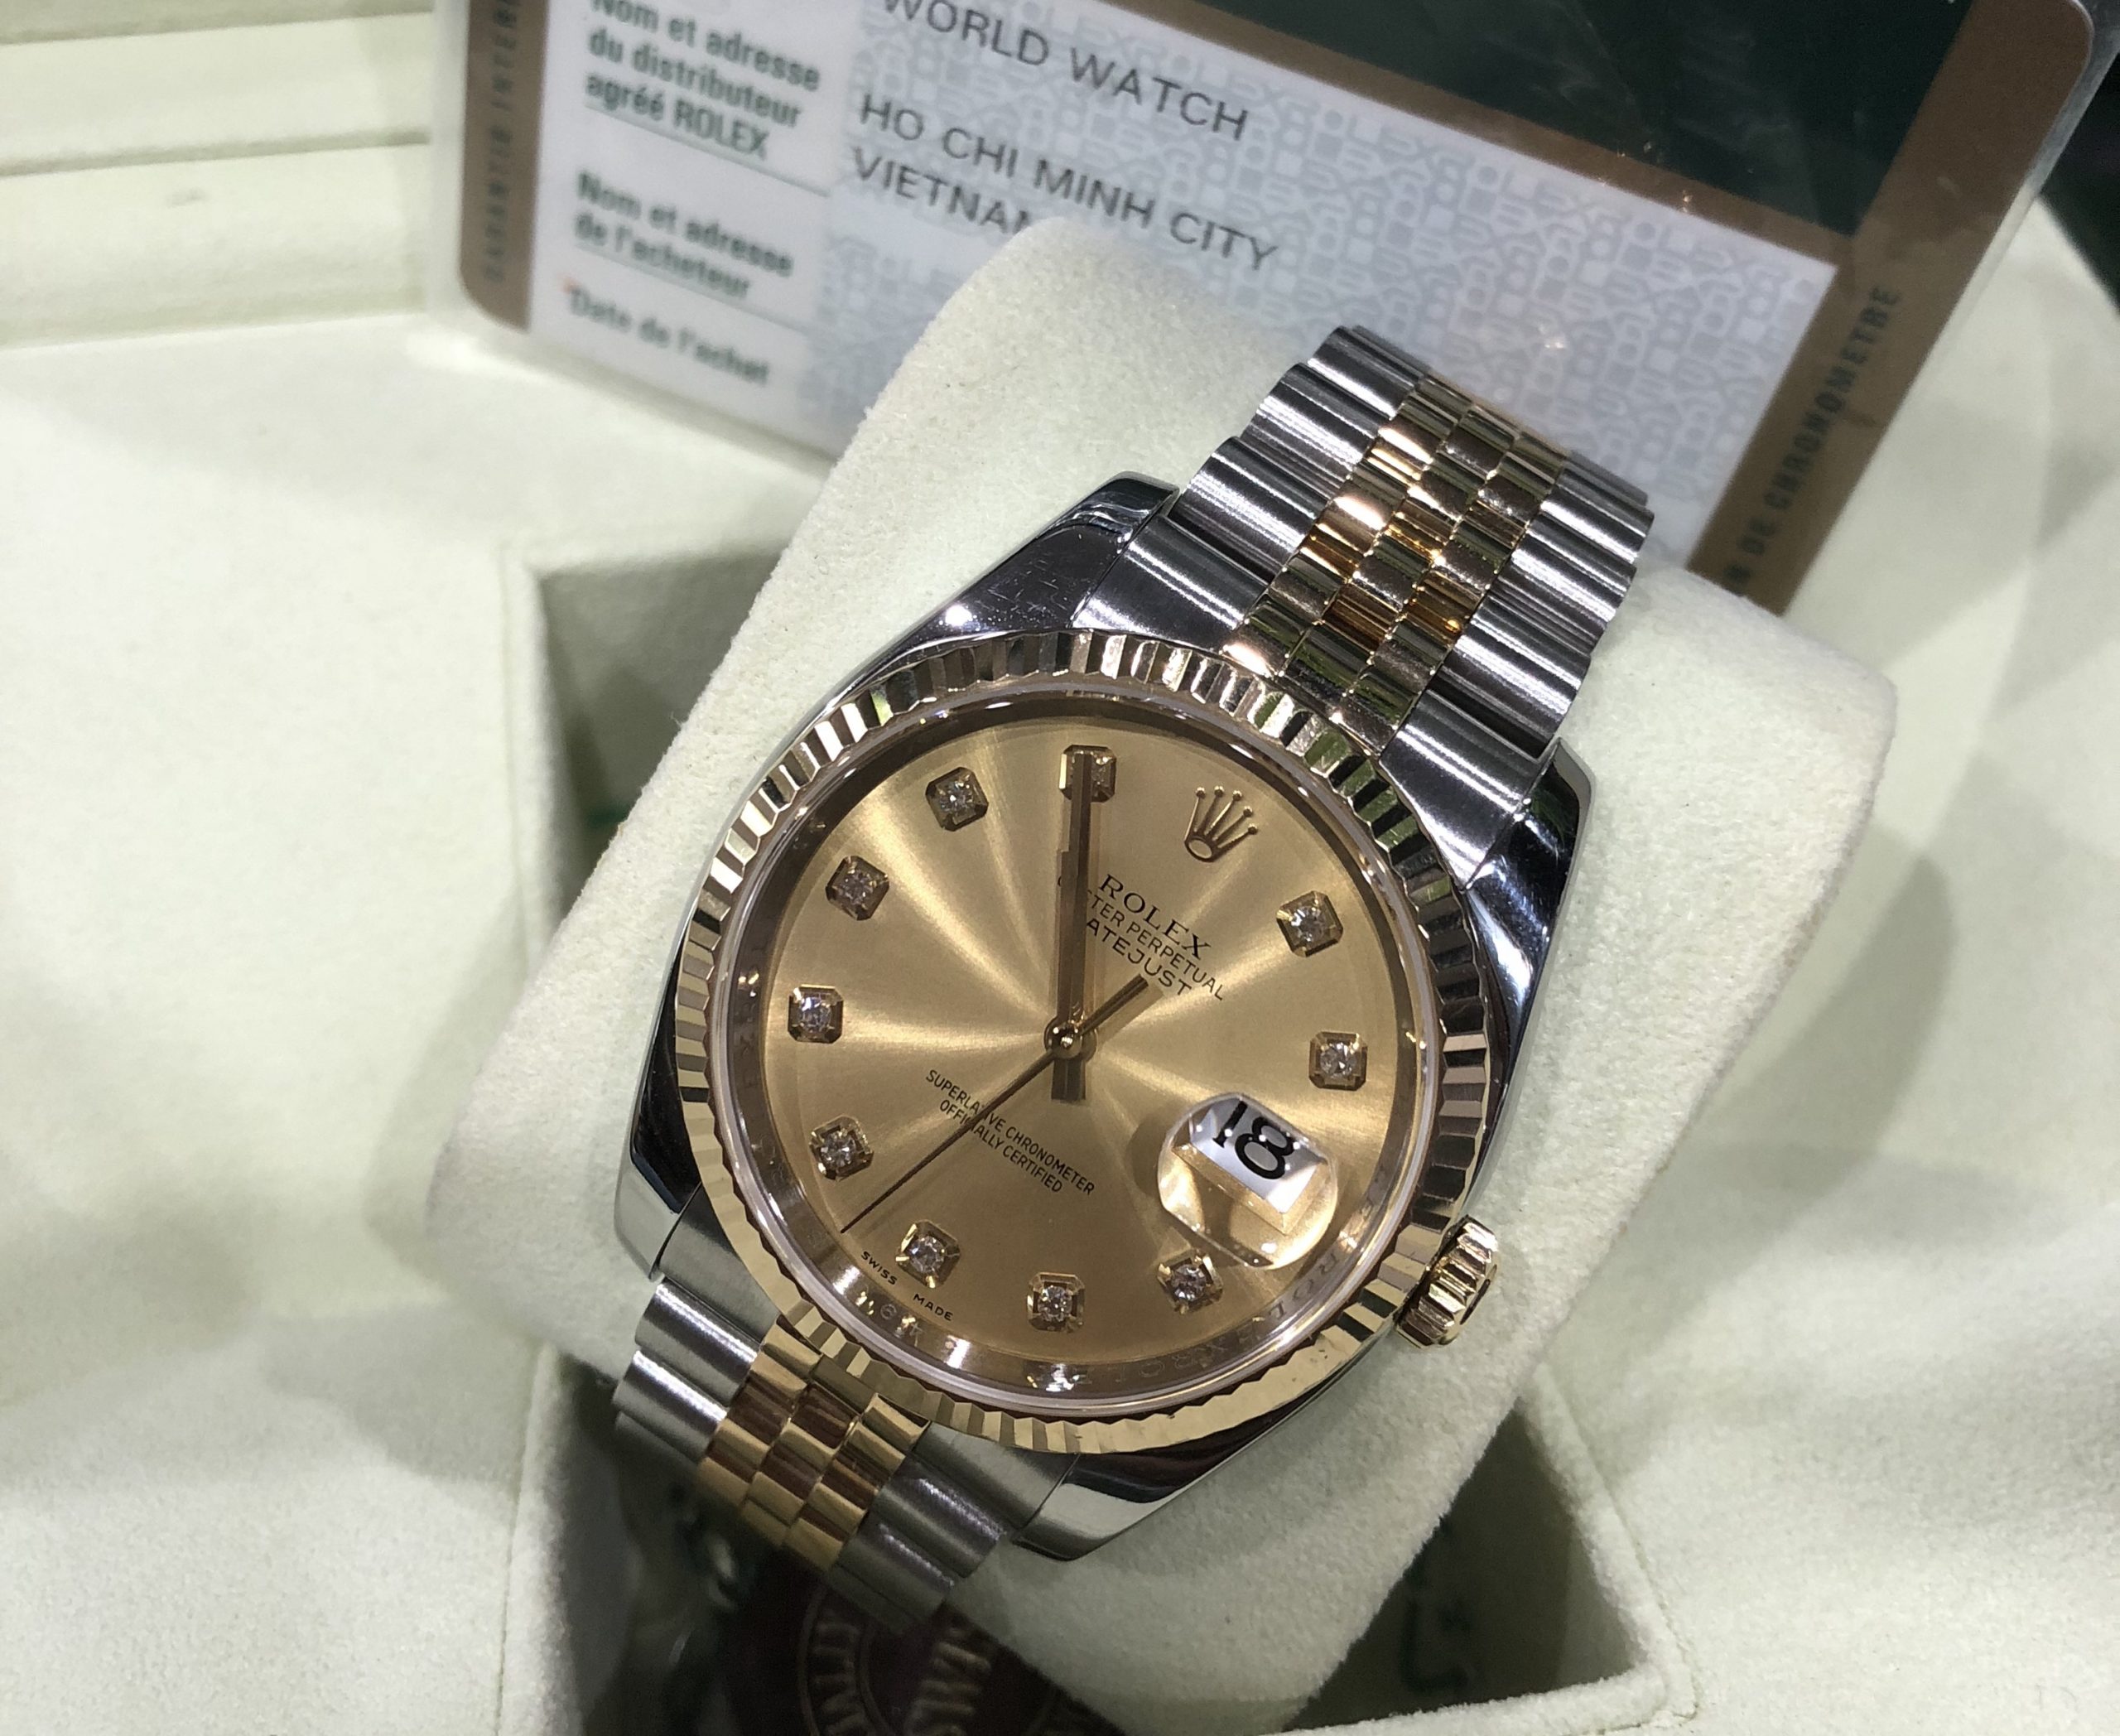 rolex-oyster-perpetual-datejust-36-ref-116233-1